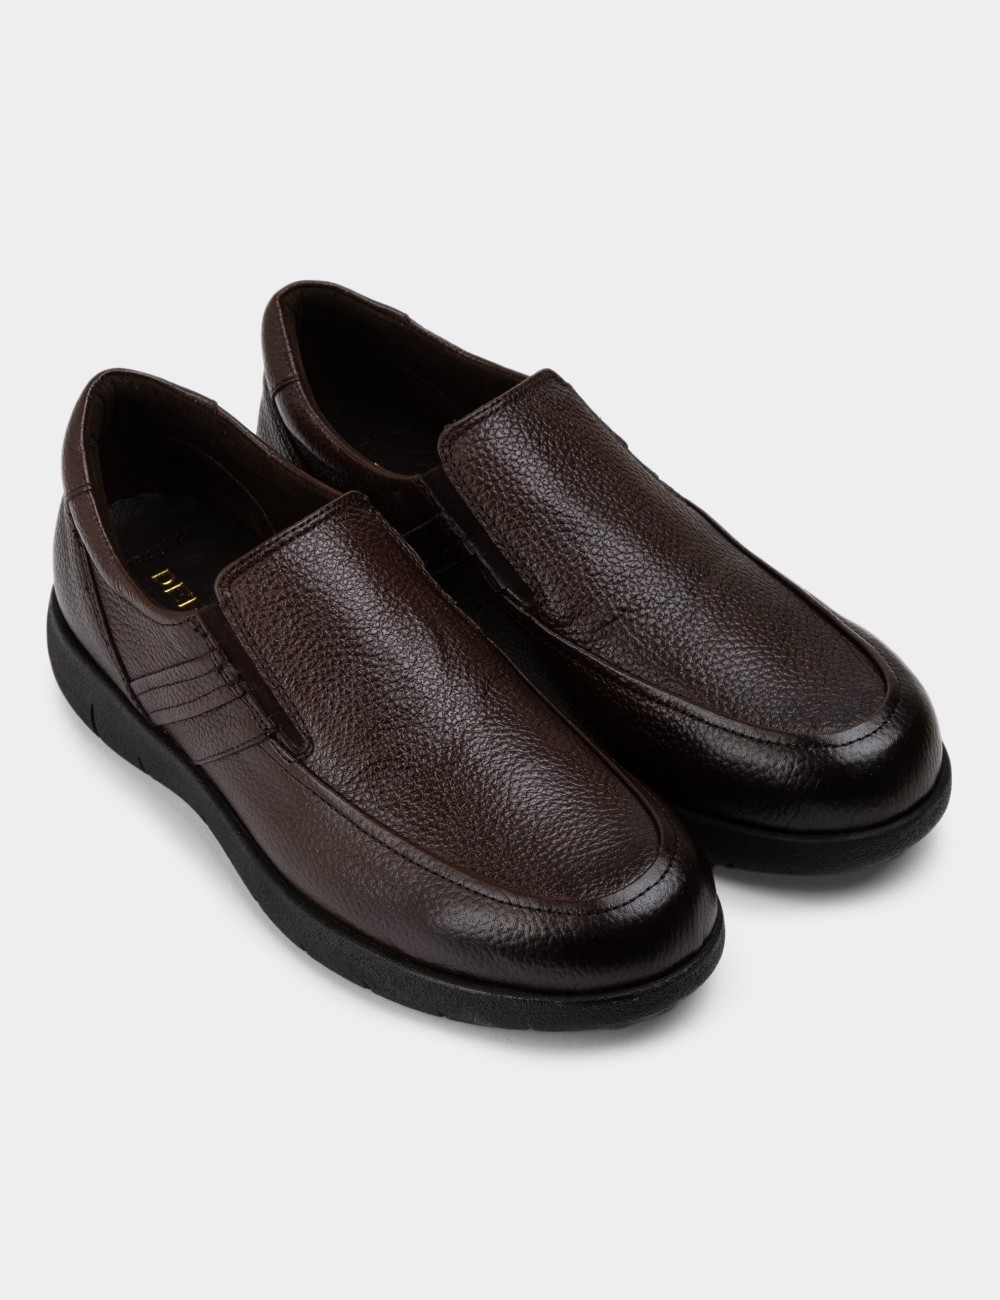 Brown Leather Loafers Shoes - 01946MKHVC01